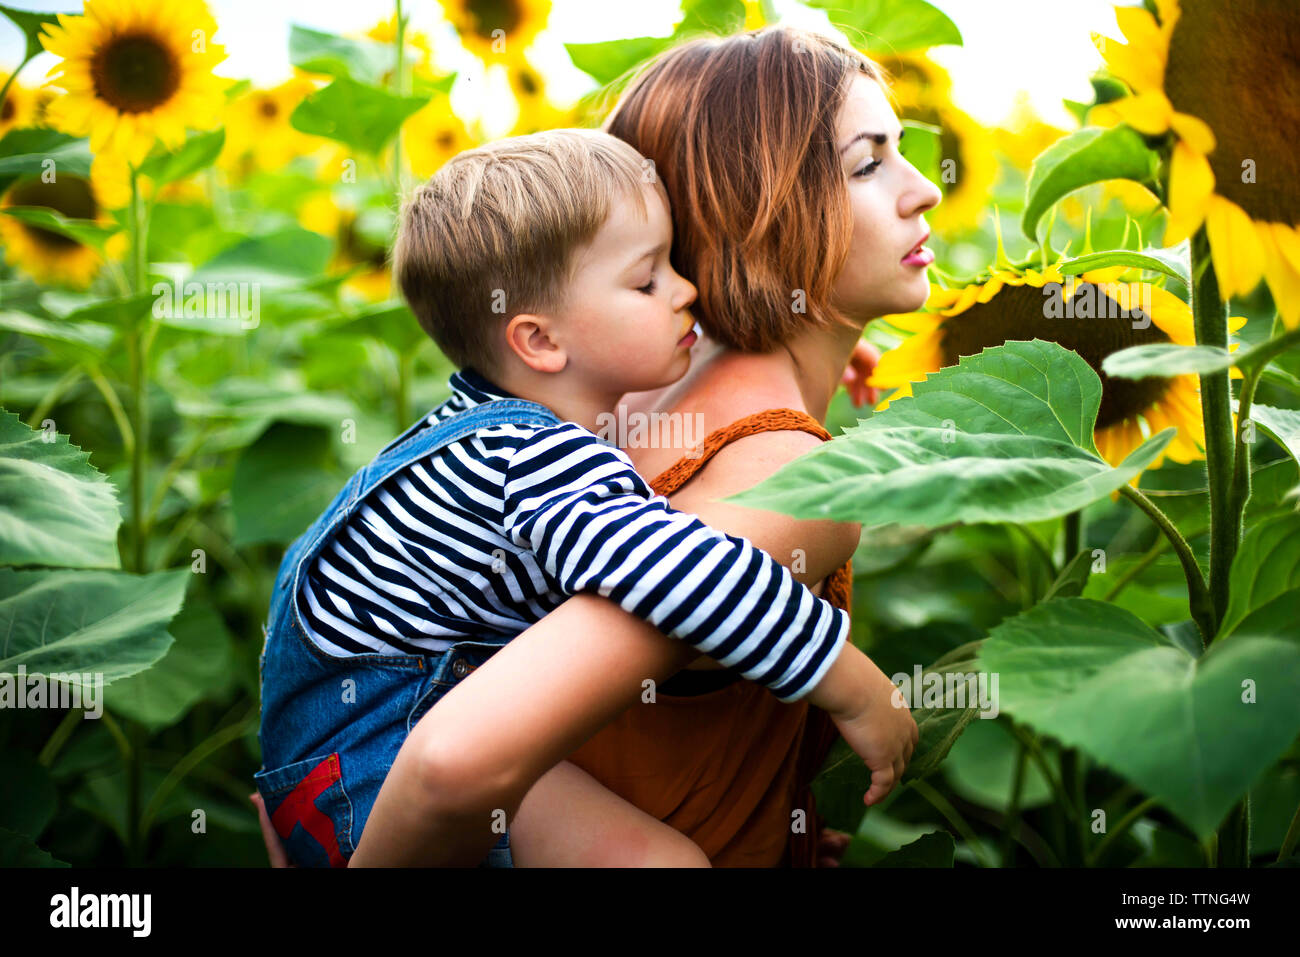 Woman standing in the sunflower field, holding her son on her back. Stock Photo